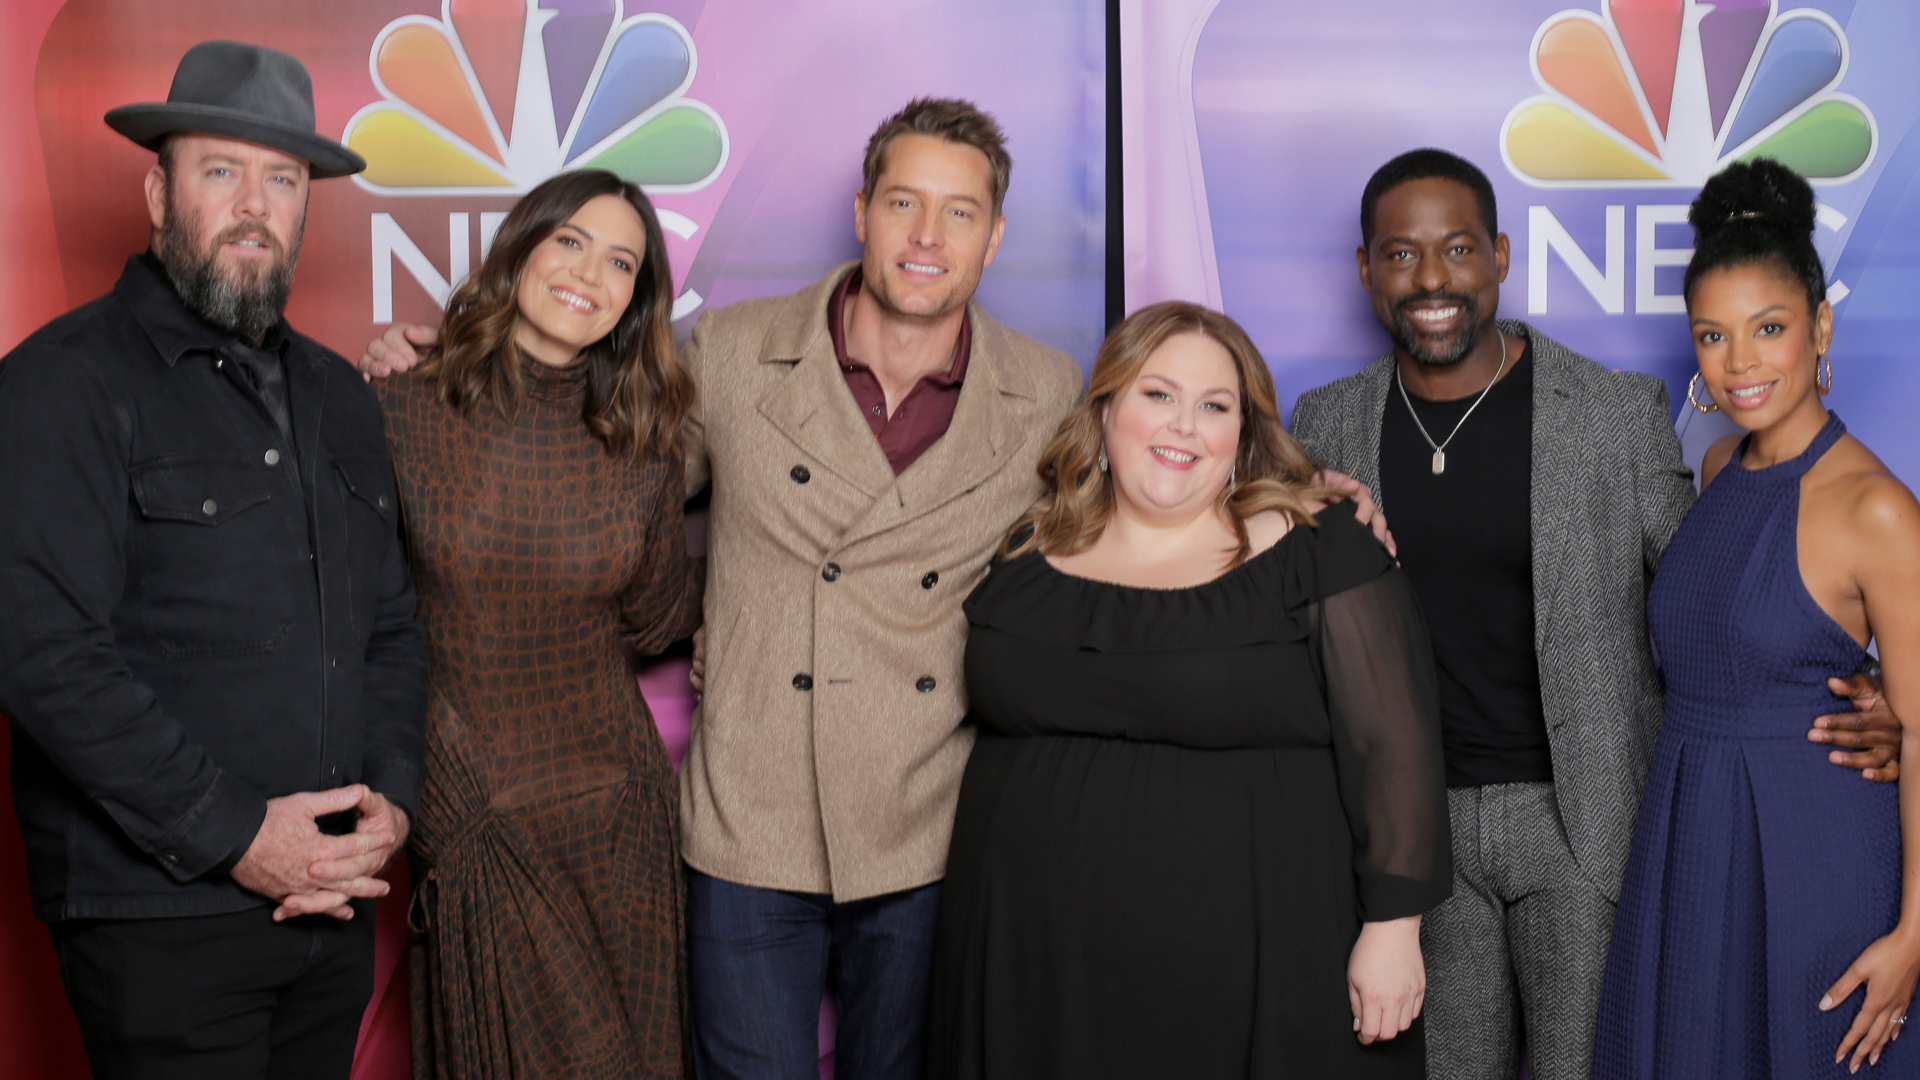 The 'This Is Us' Cast Chris Sullivan, Mandy Moore, Justin Hartley, Chrissy Metz, Sterling K. Brown, and Susan Kelechi Watson